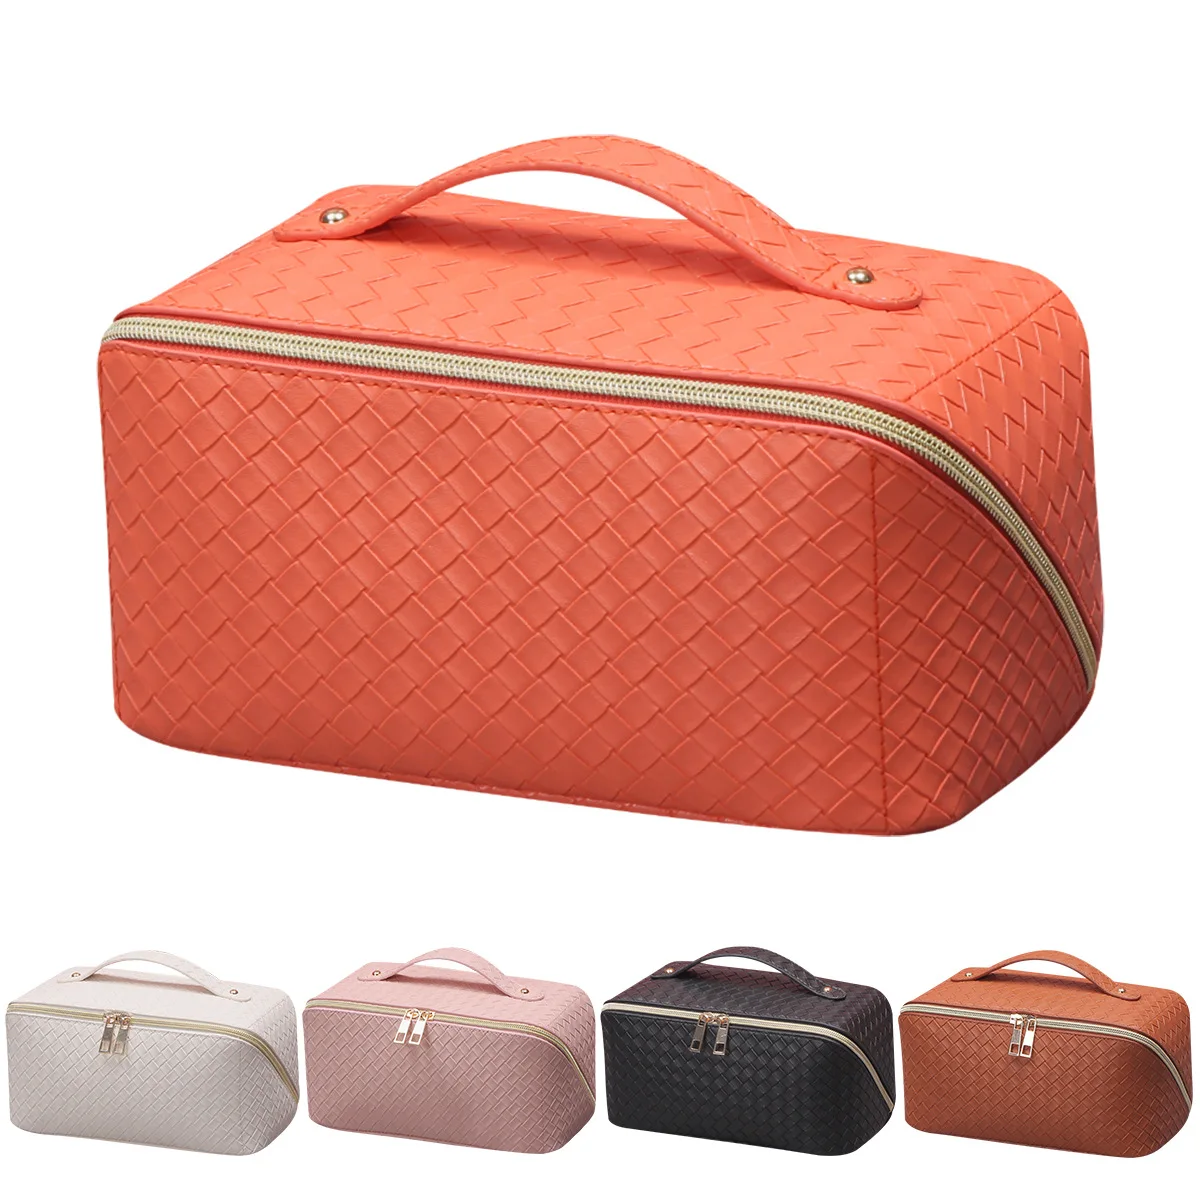 Large Capacity Travel Cosmetic Bag Women PU Leather Portable Makeup Pouch Waterproof Wash bags Multifunctional Toiletry Kit